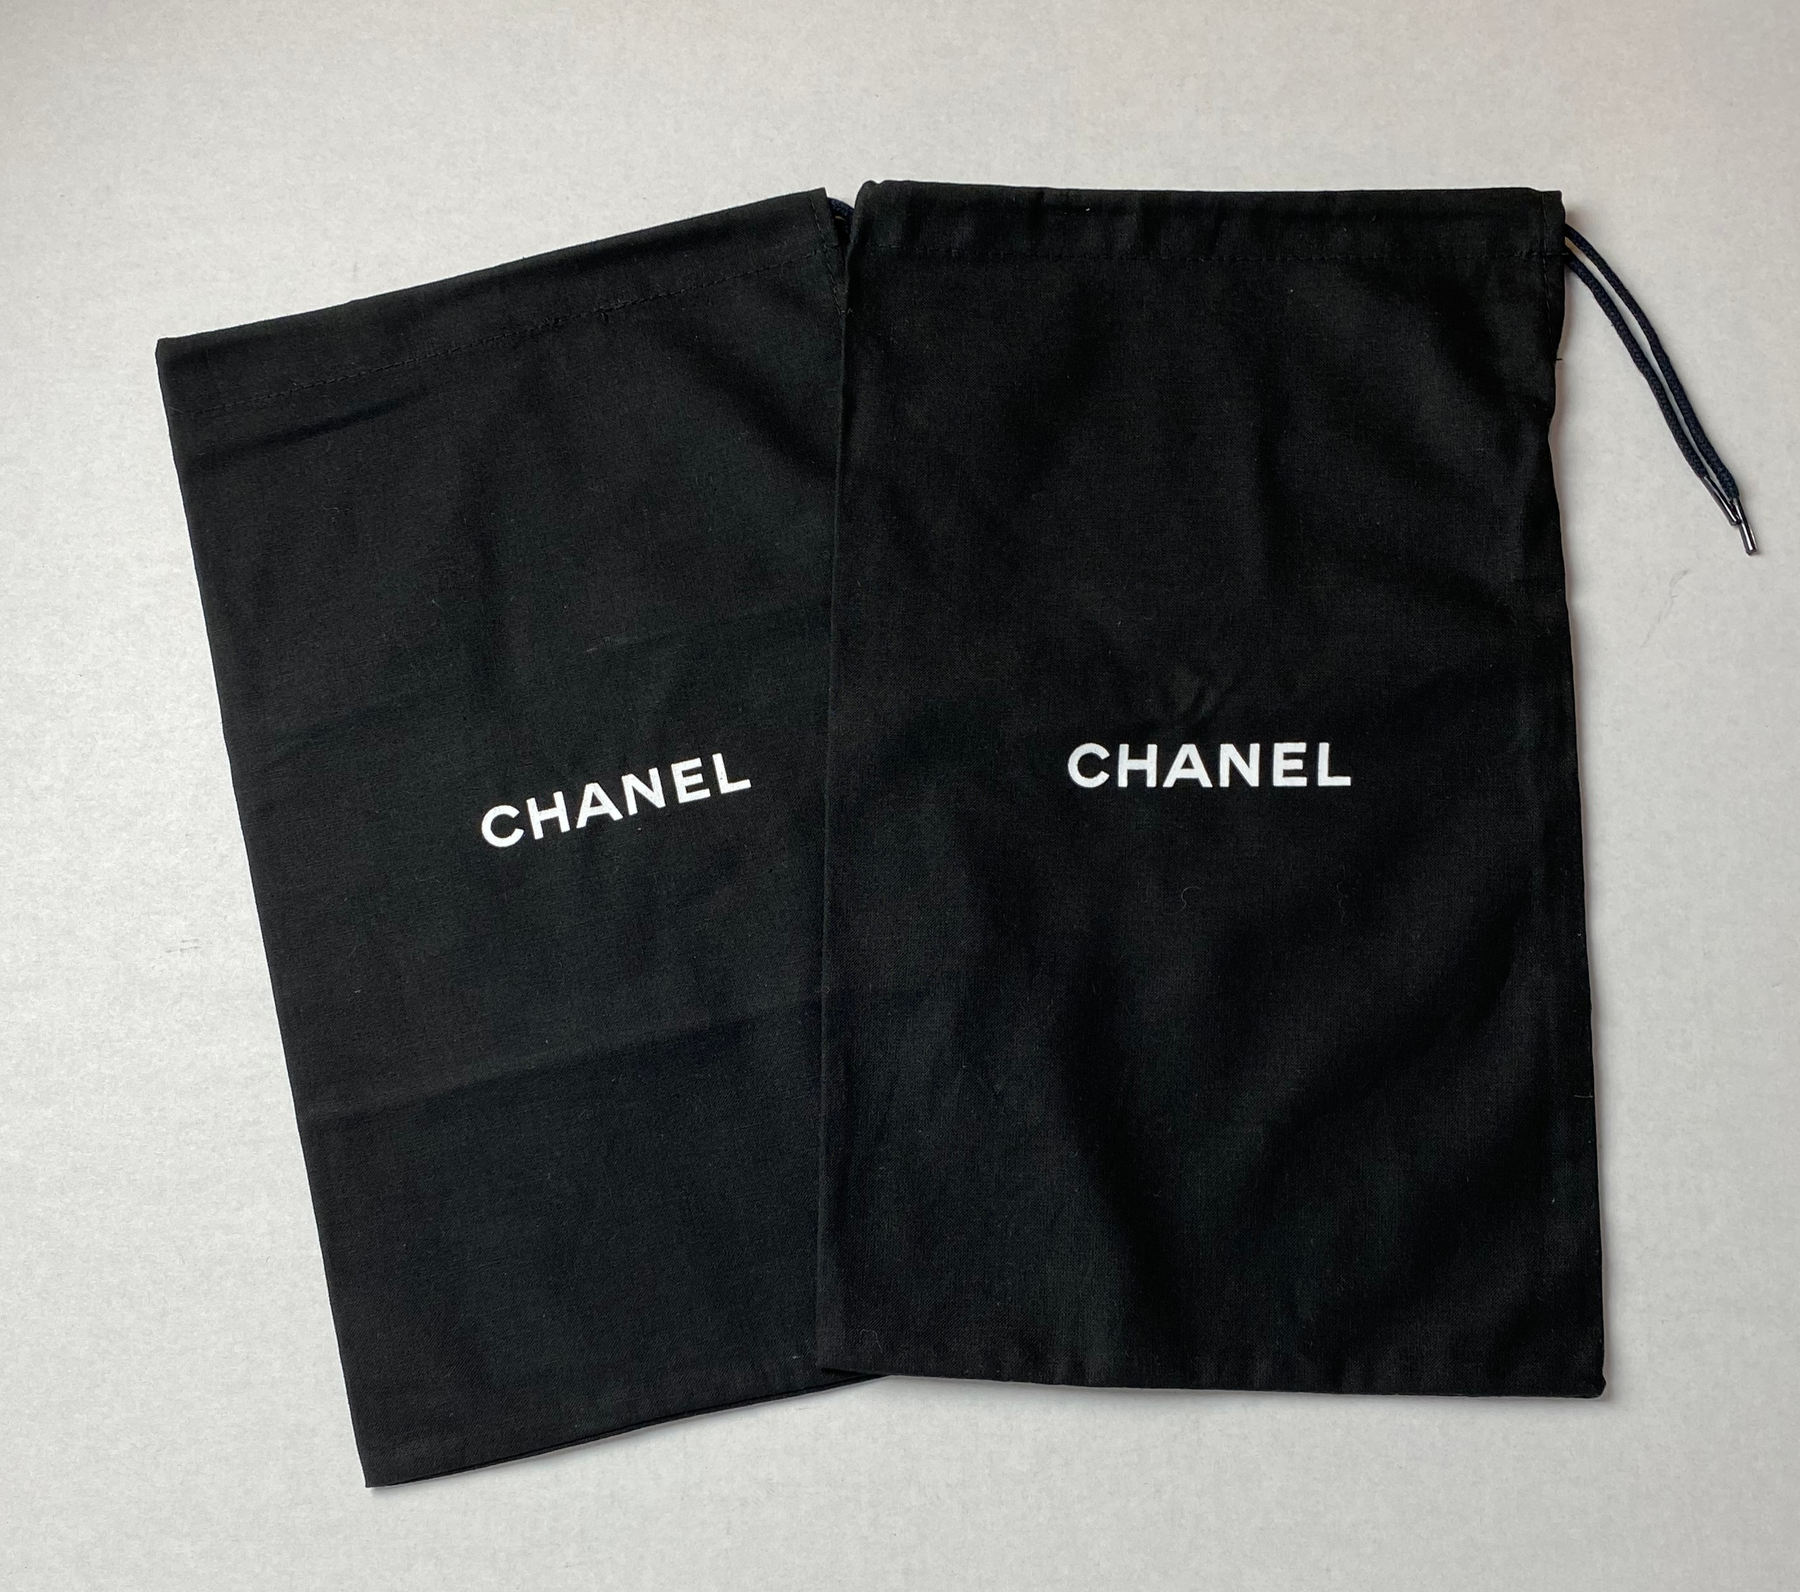 100% Auth Chanel Set of Two Black Shoe/ Small Bag/ Wallet Dust Bags 13x  8.25